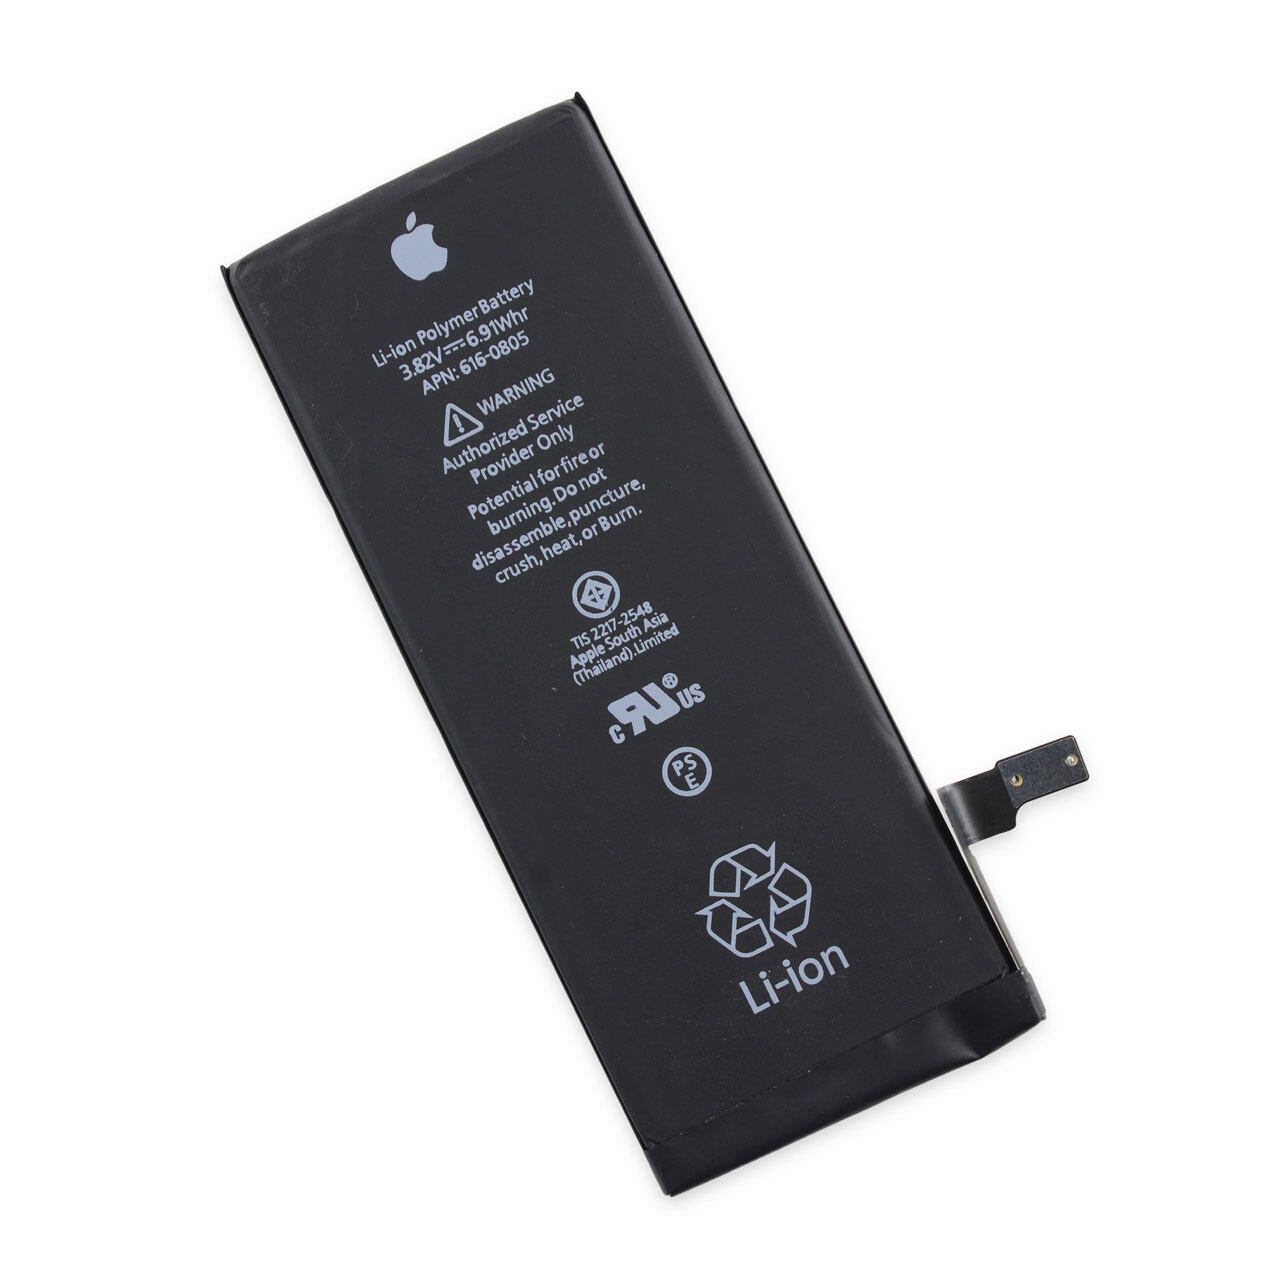 OEM Original iPhone 7 Plus Battery: Everything You Need to Know